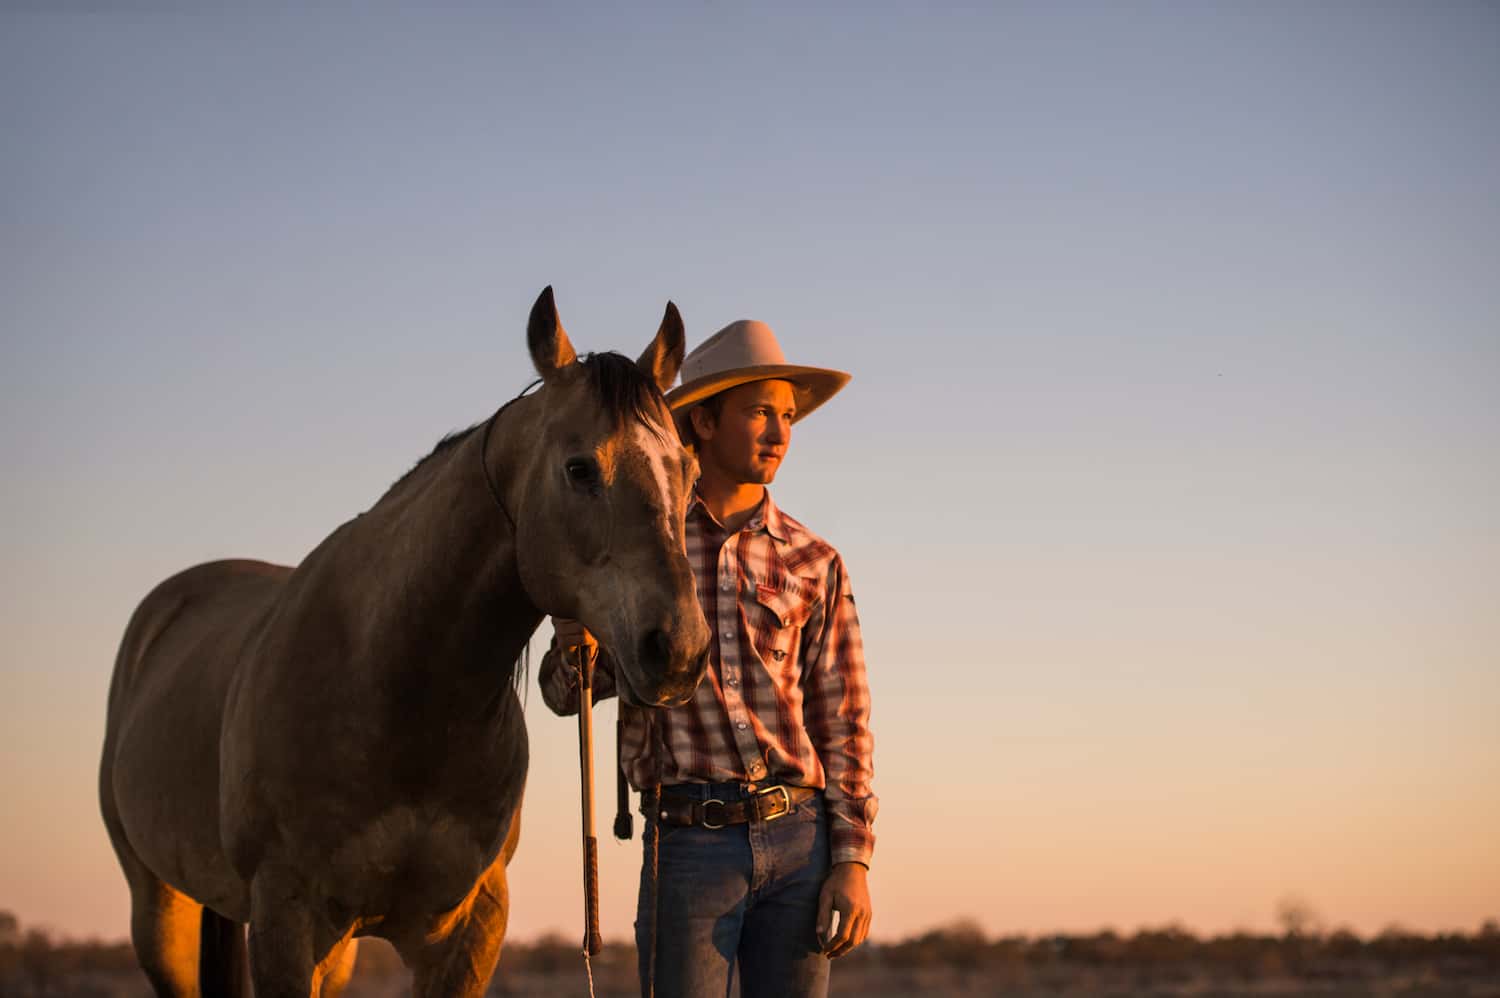 A stockman standing with his horse at sunset